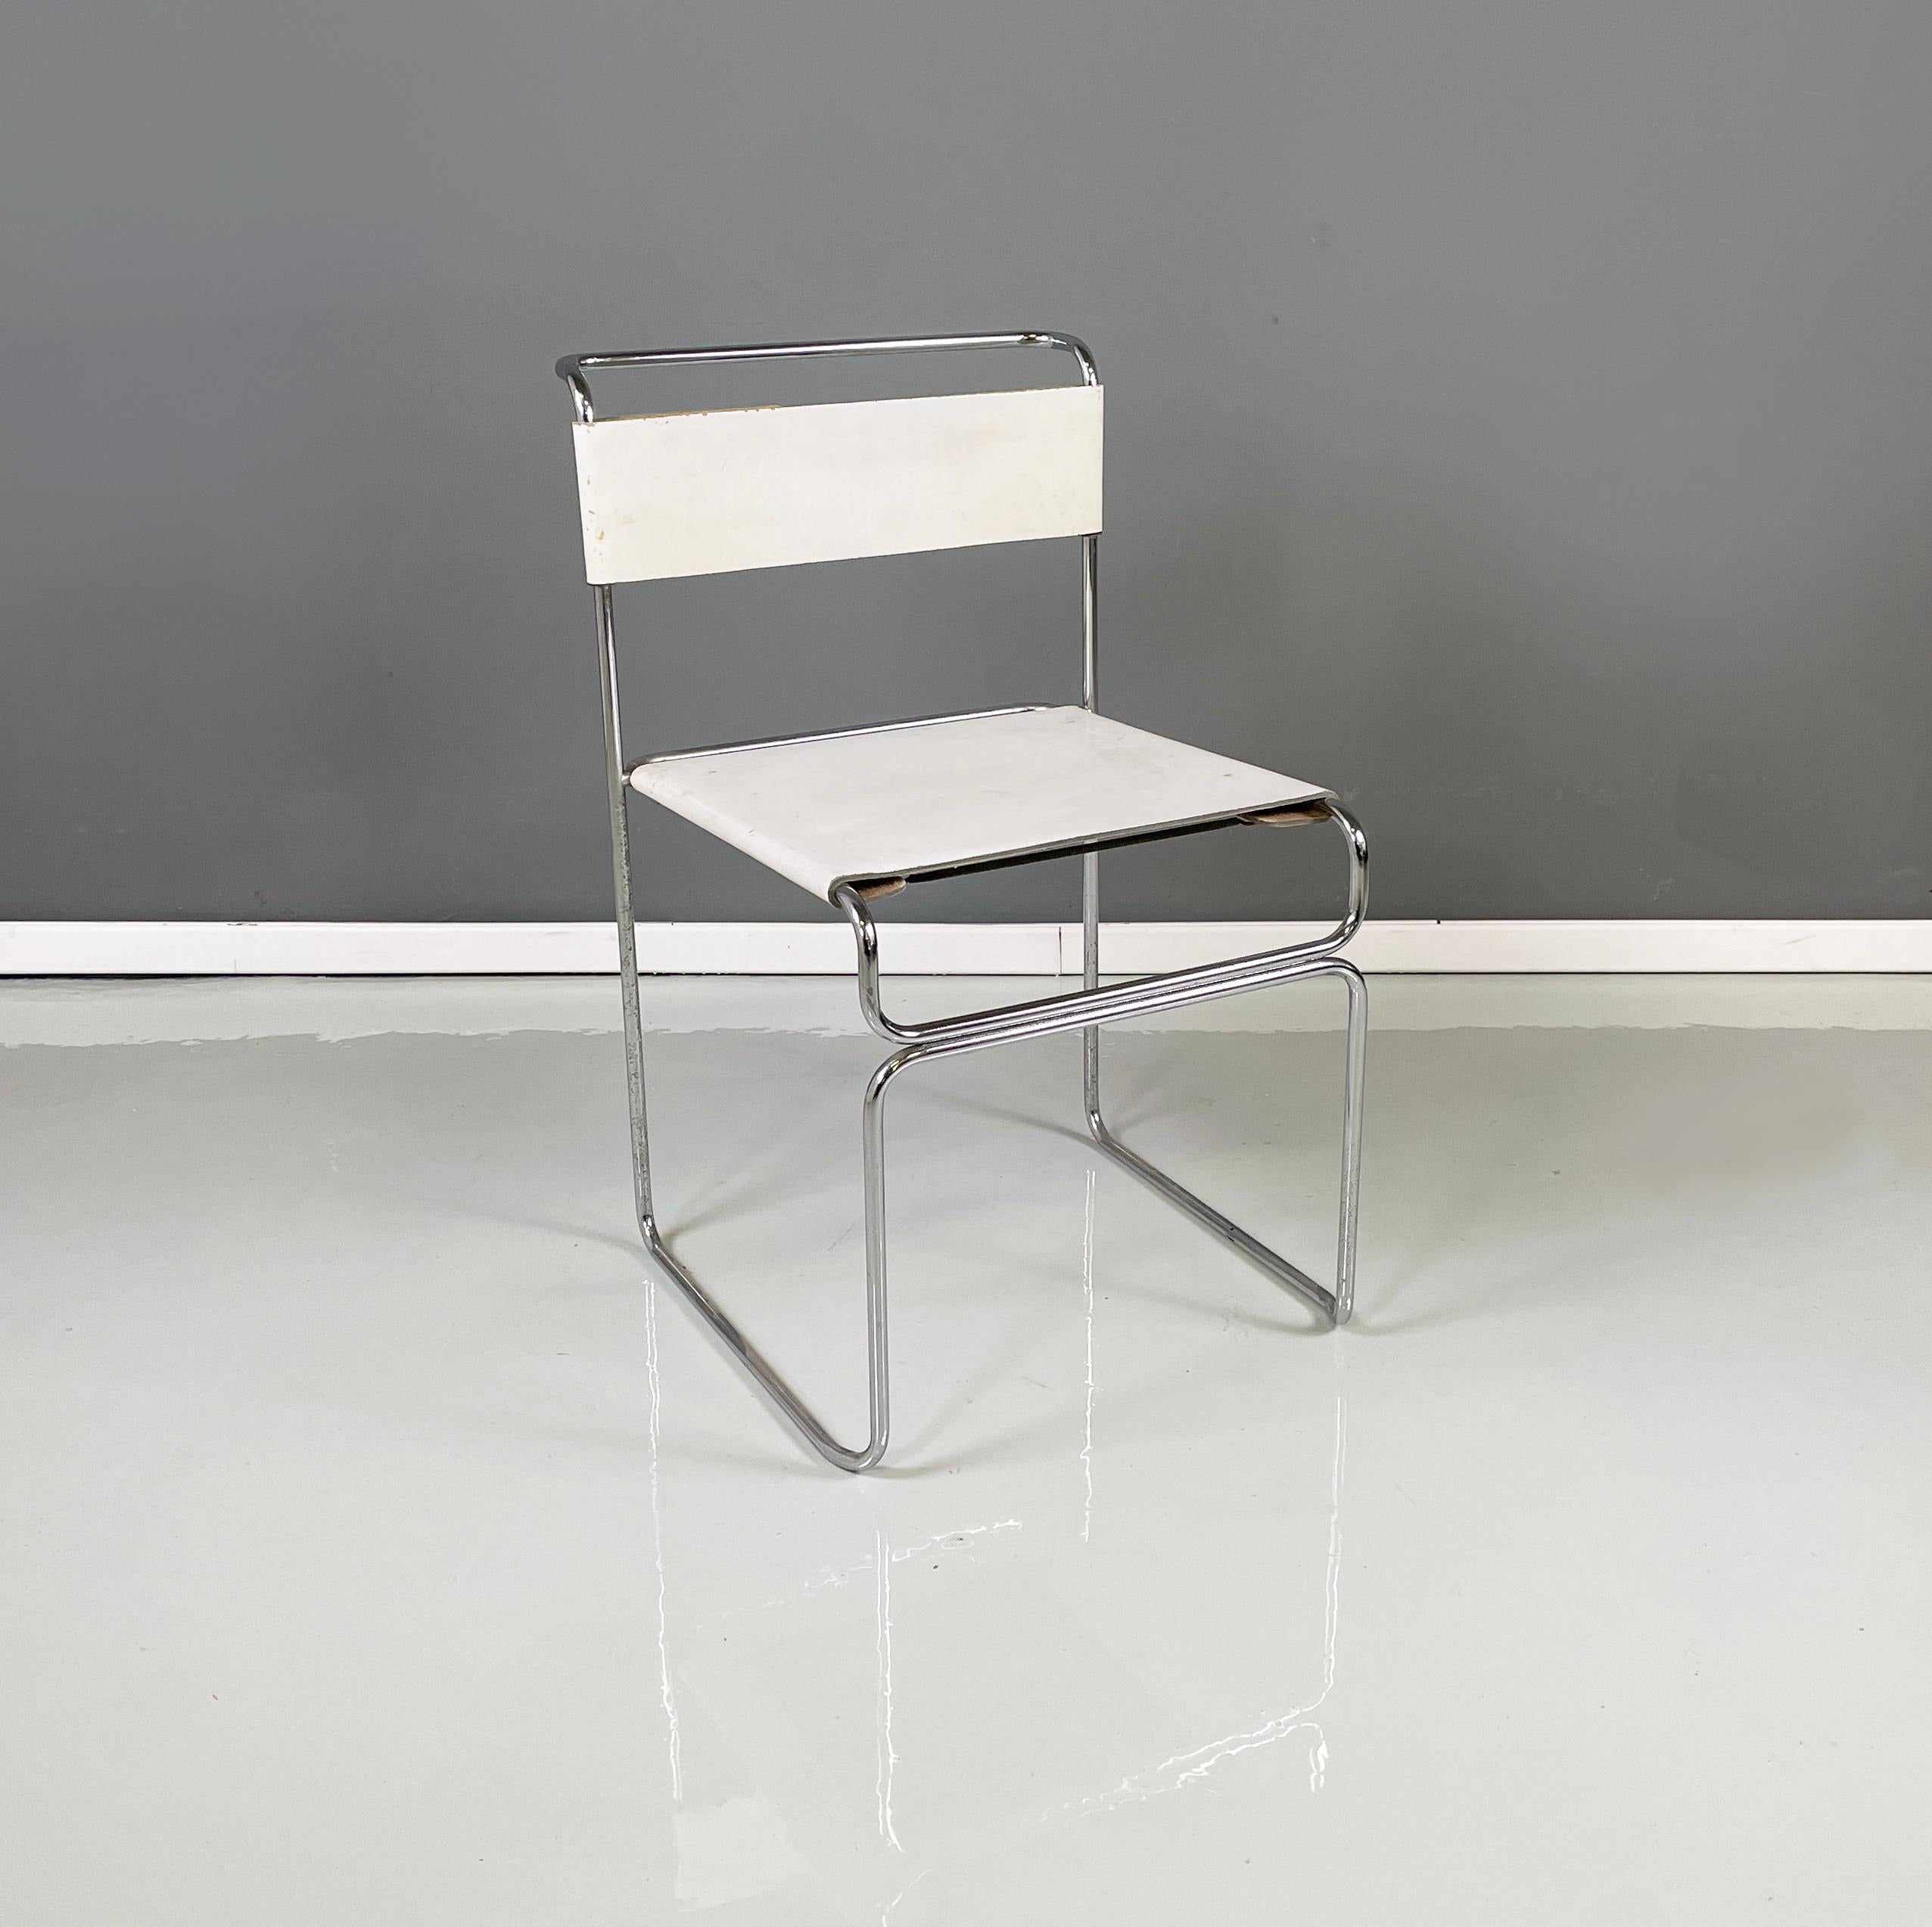 Italian modern White Chairs Libellula by Giovanni Carini for Planula, 1970s 
Set of 3 chairs mod. Libellula, stackable with metal rod structure. The seat and back are in white leather.
Produced by Planula in 1970s and designed by Giovanni